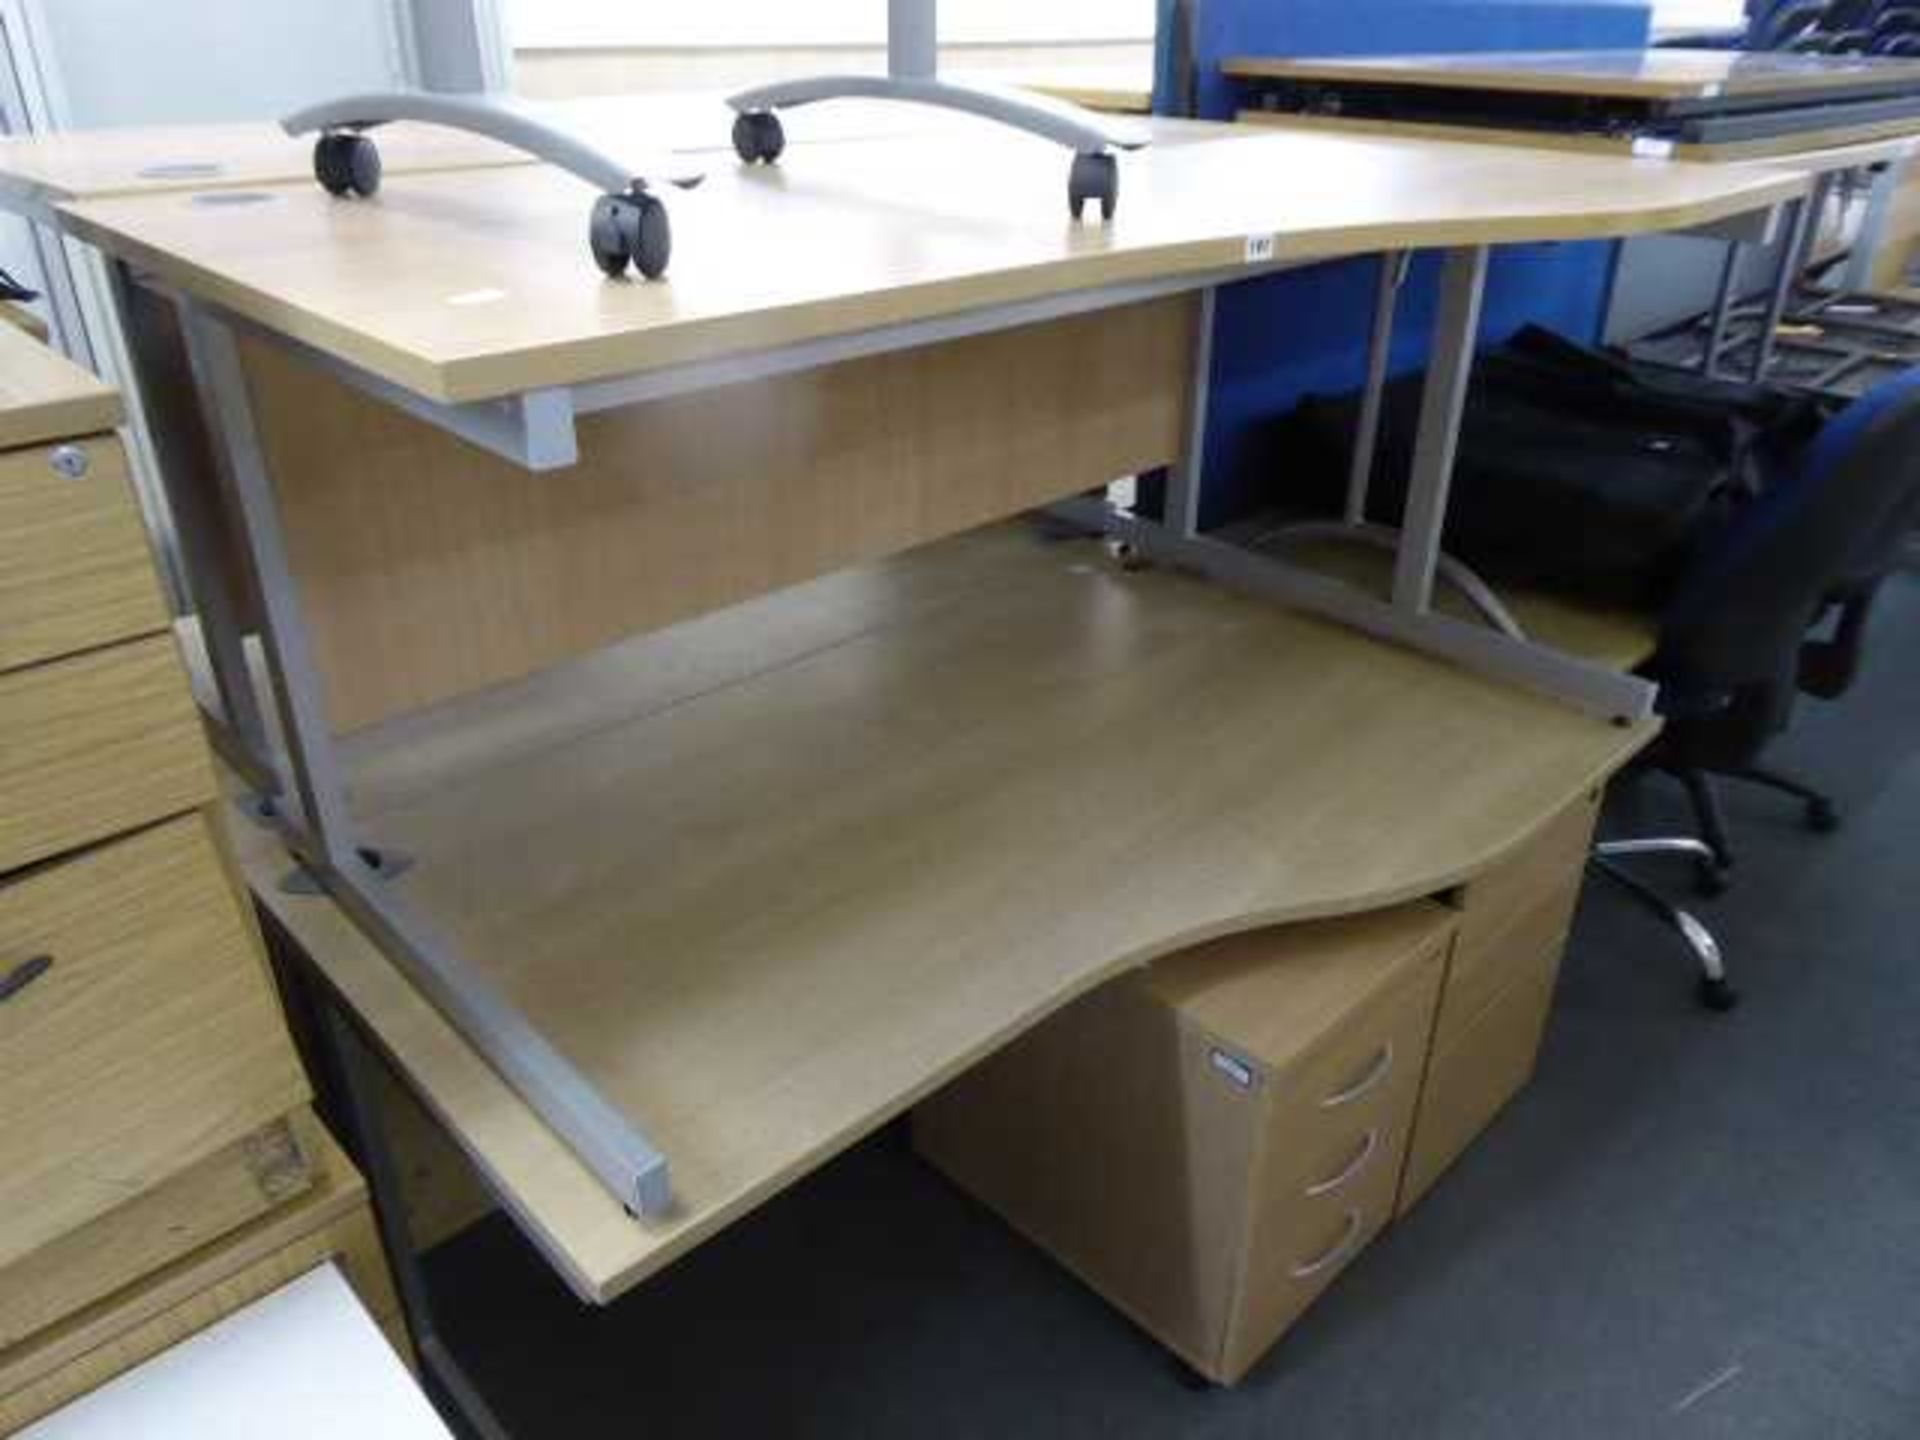 4 160cm wave front desks on cantilever legs, each with non matching pedestal